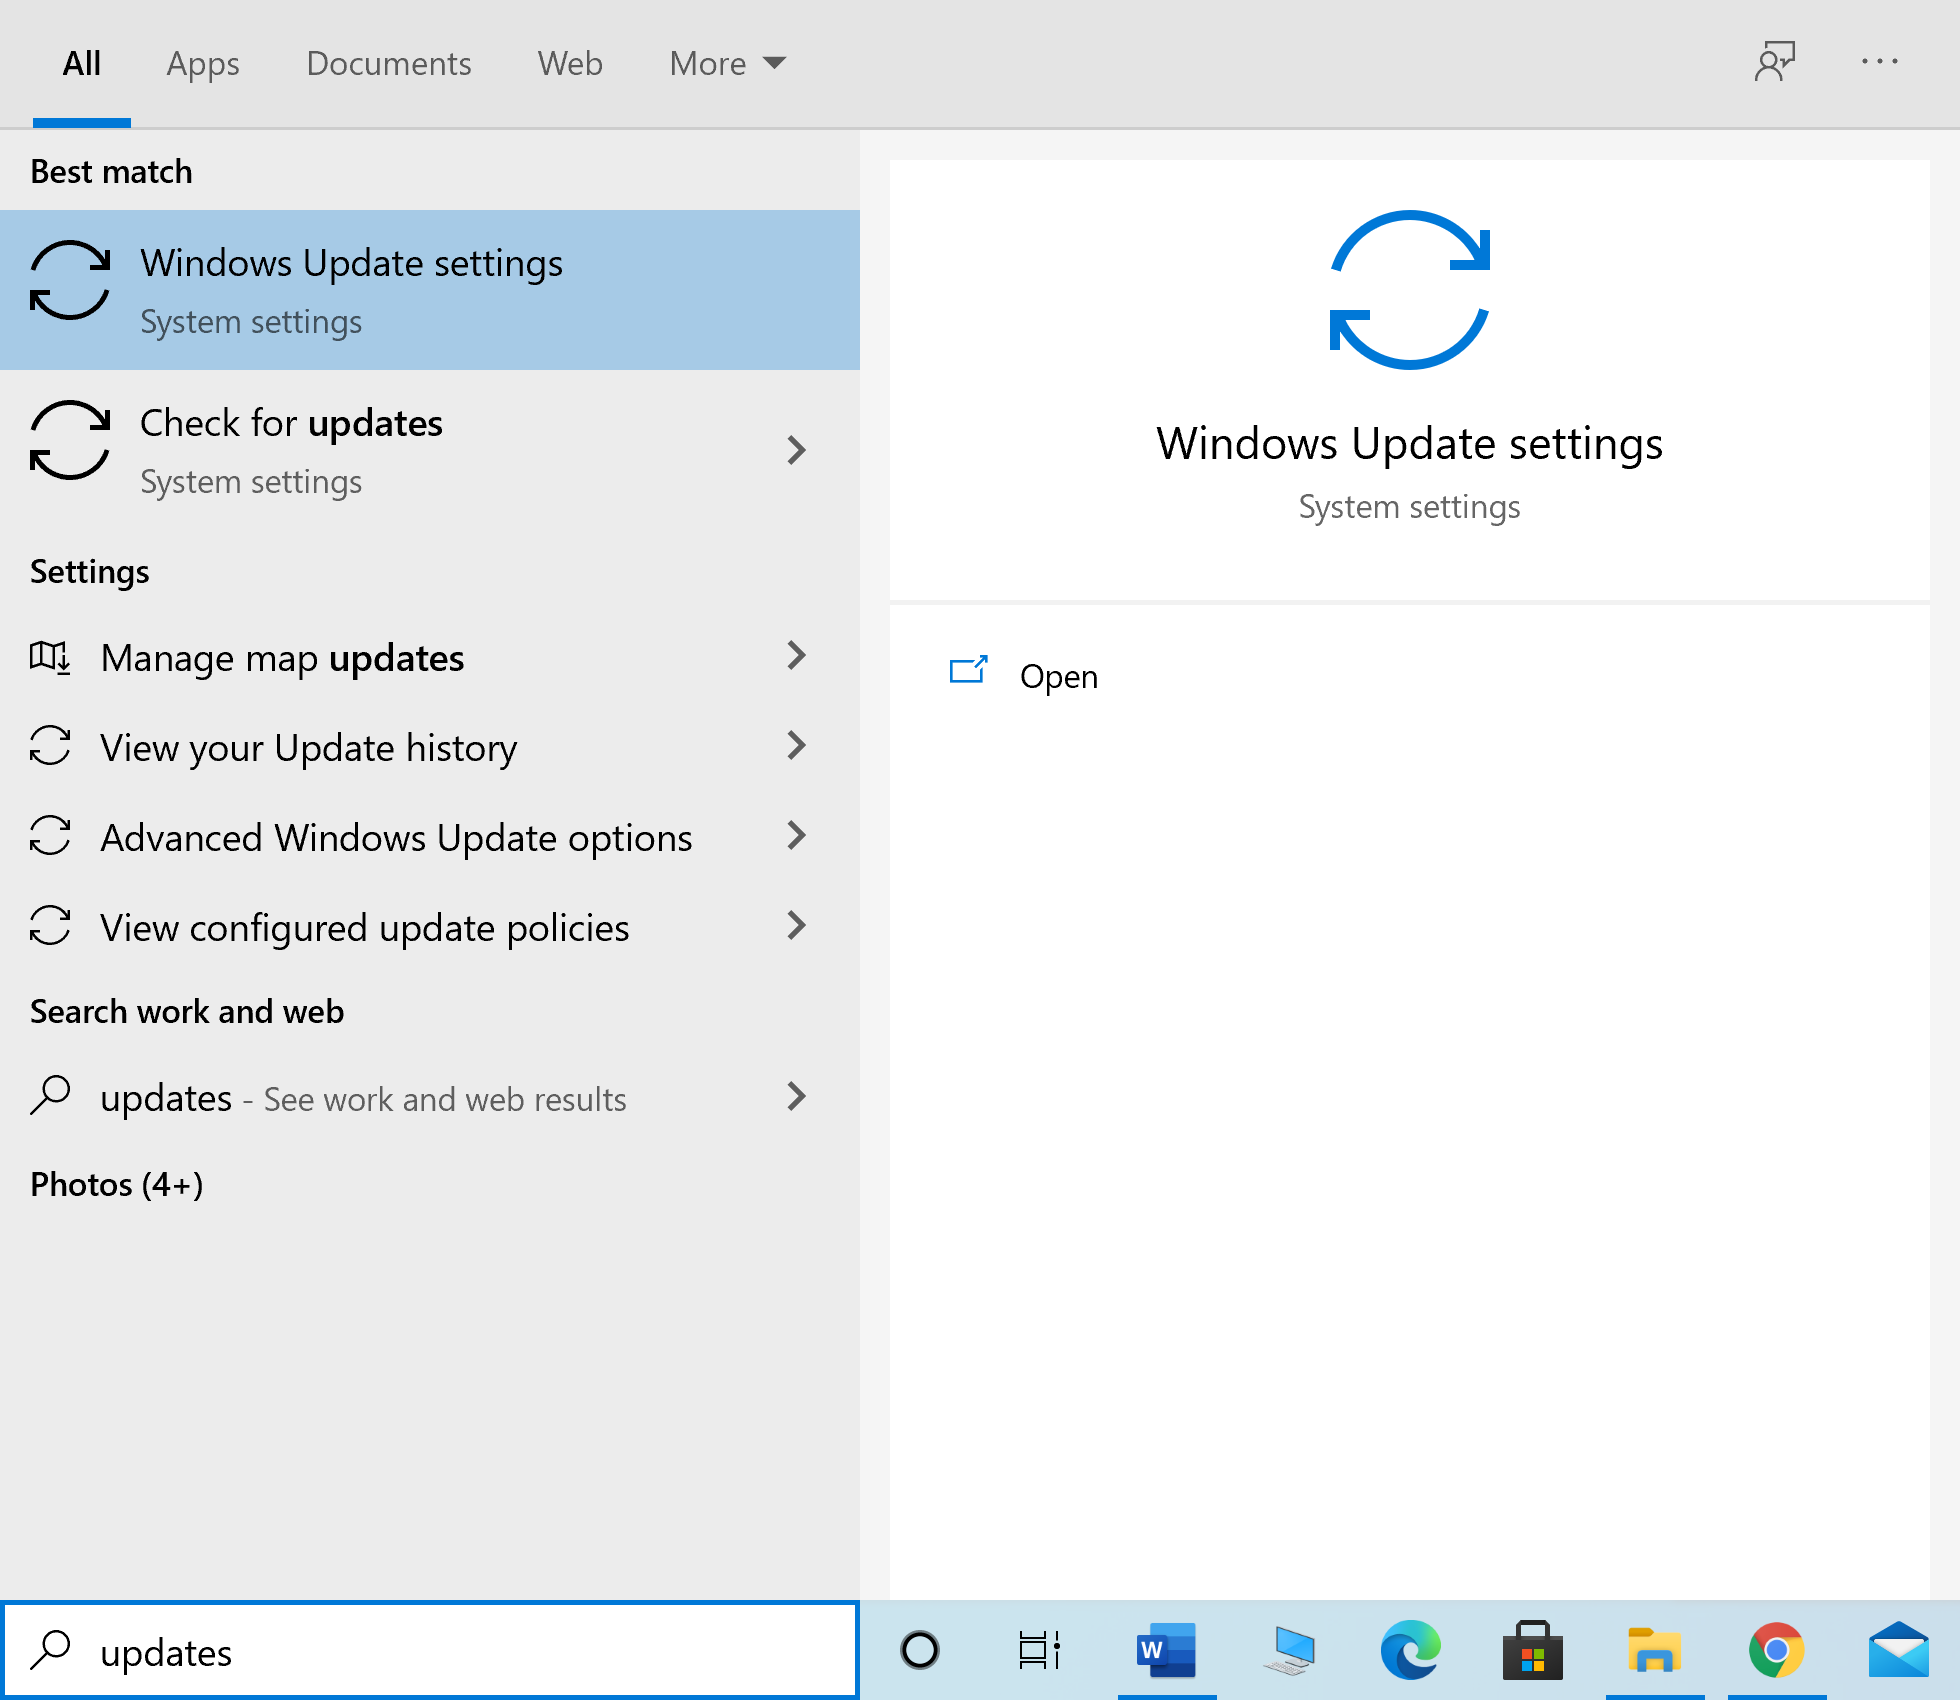 Type Updates into Windows search and launch the Windows Update settings from the search result.